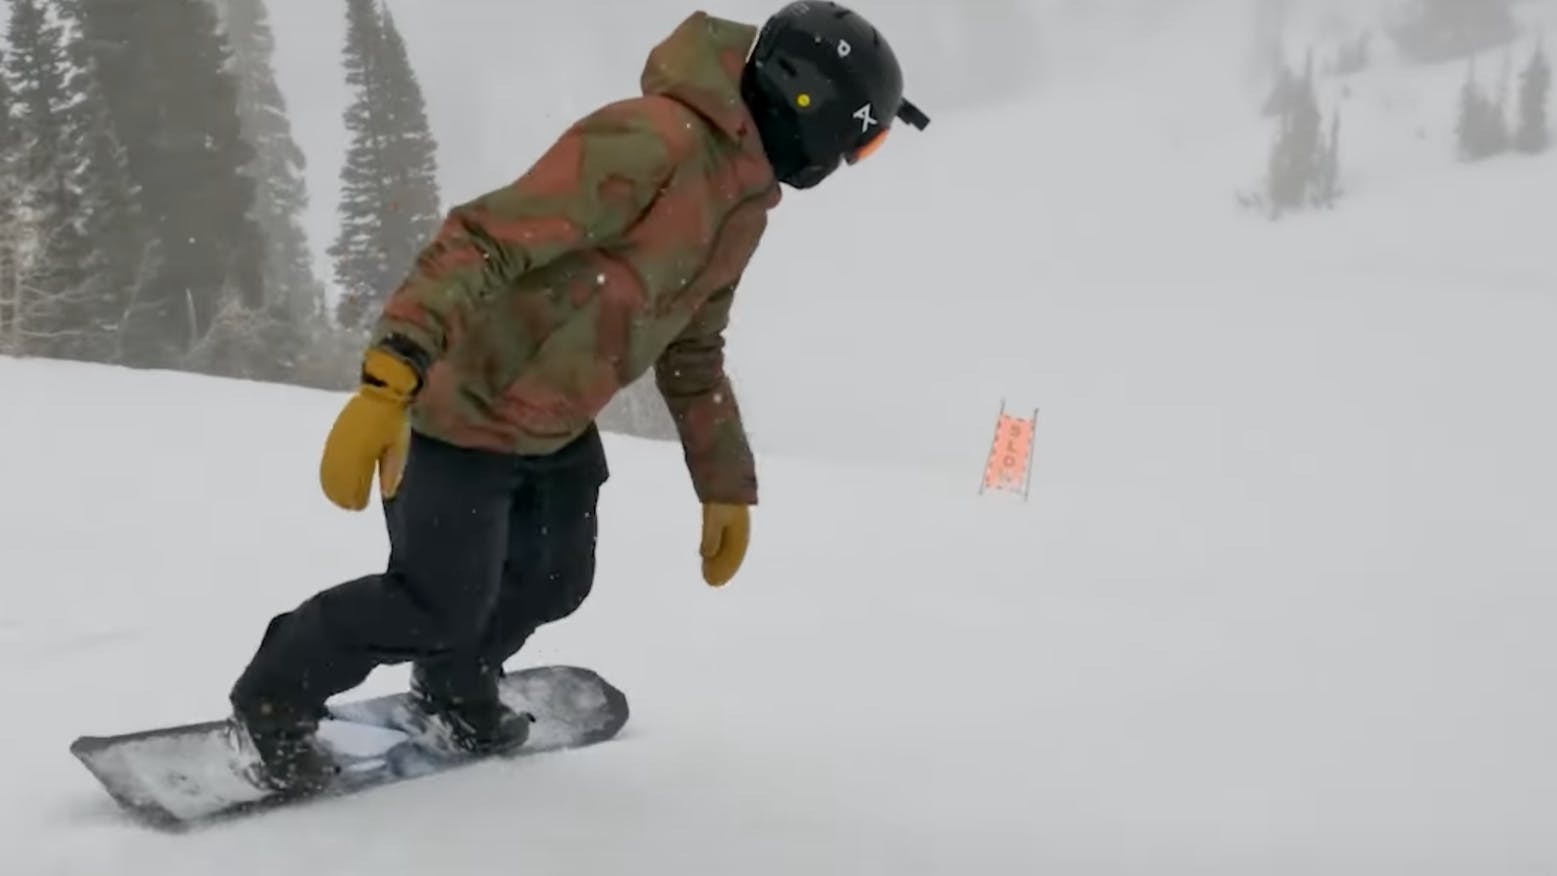 A snowboarder turning down the mountain on the Lib Tech Orca snowboard. 